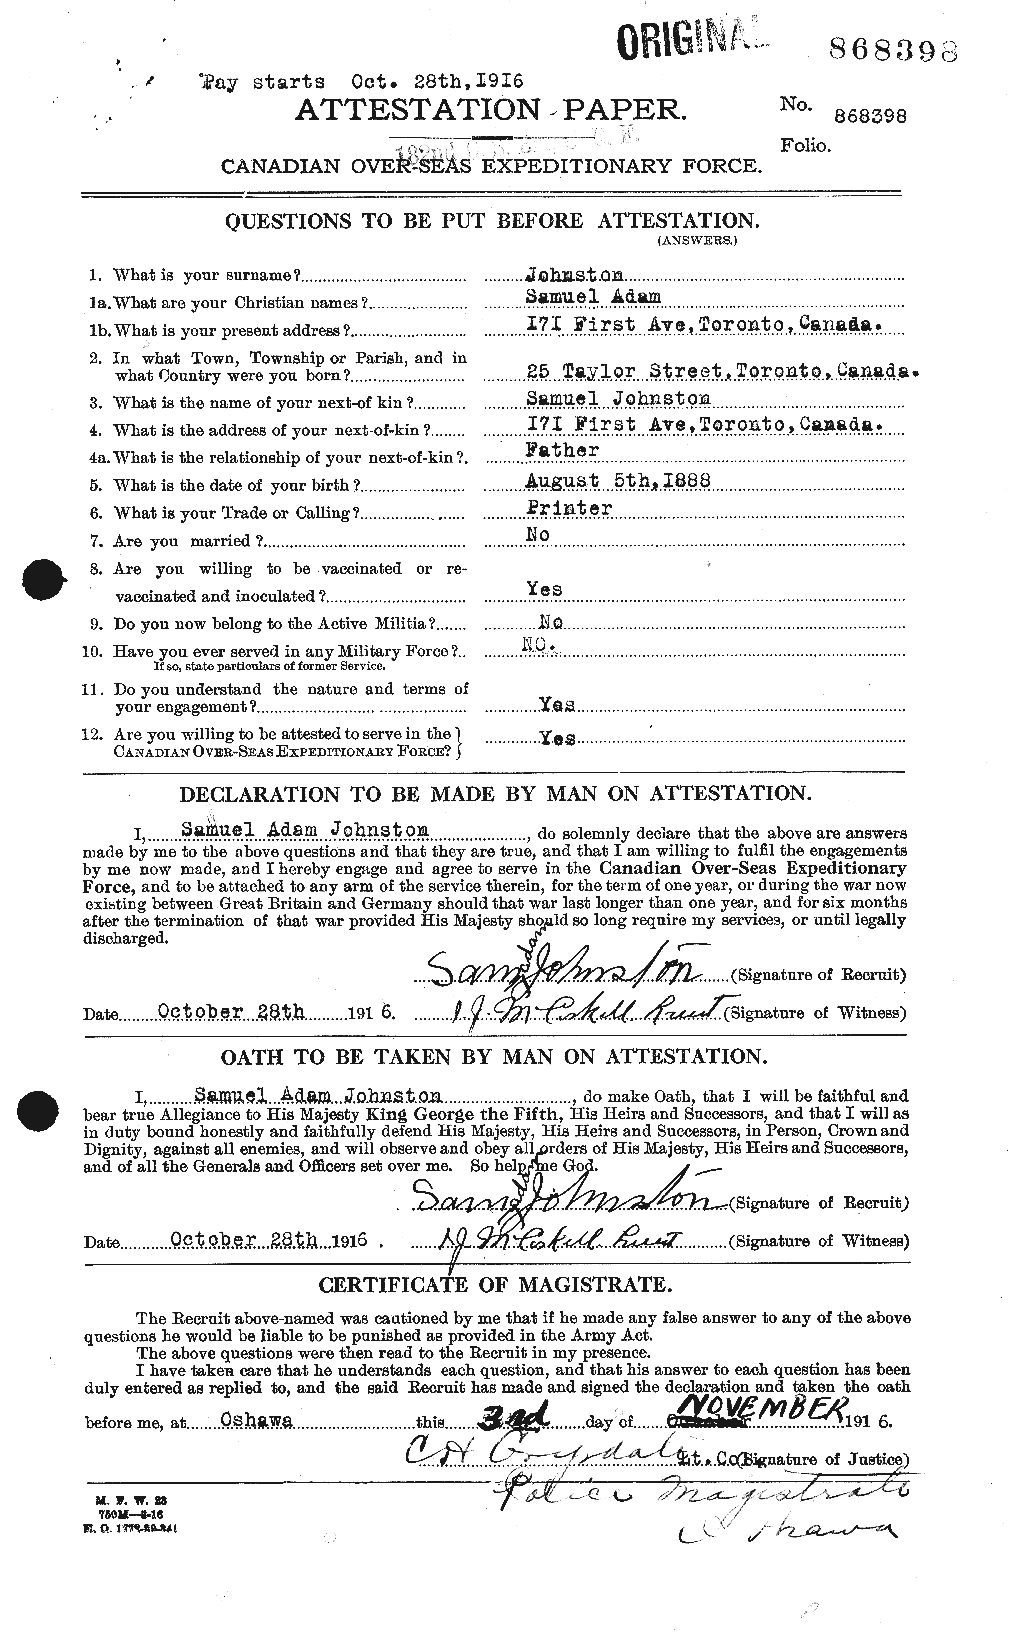 Personnel Records of the First World War - CEF 427084a